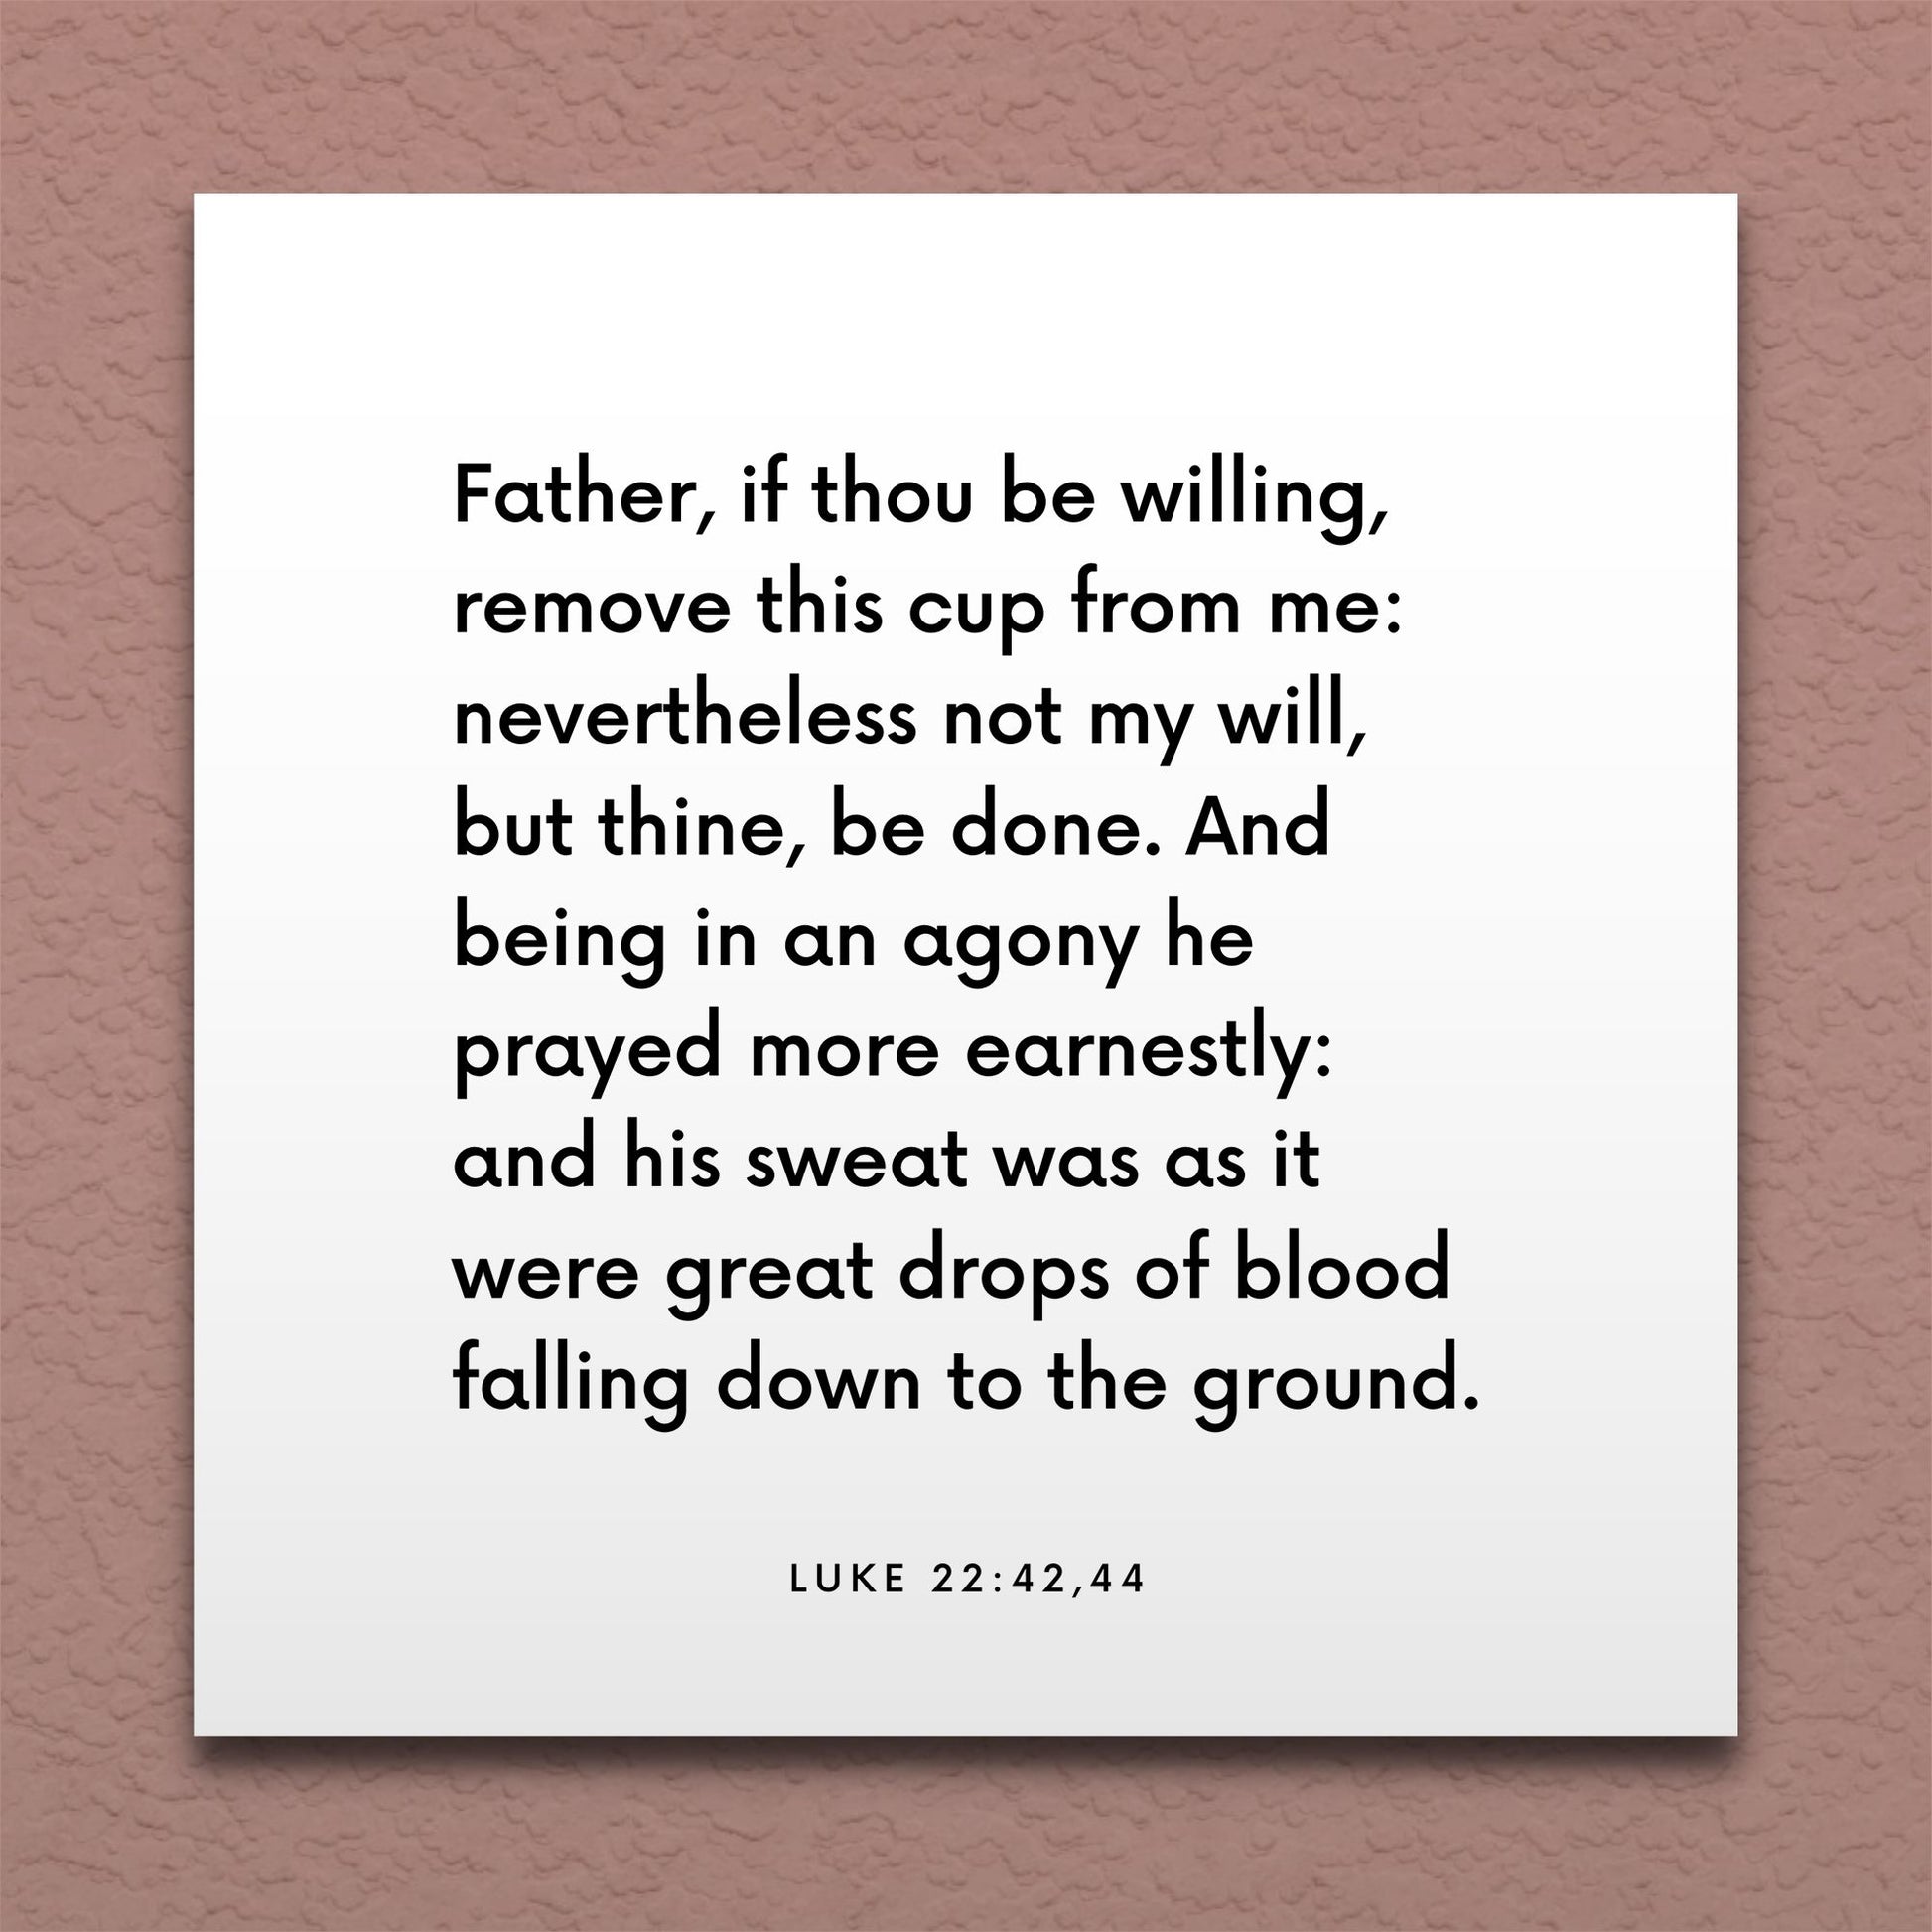 Wall-mounted scripture tile for Luke 22:42,44 - "Father, if thou be willing, remove this cup from me"